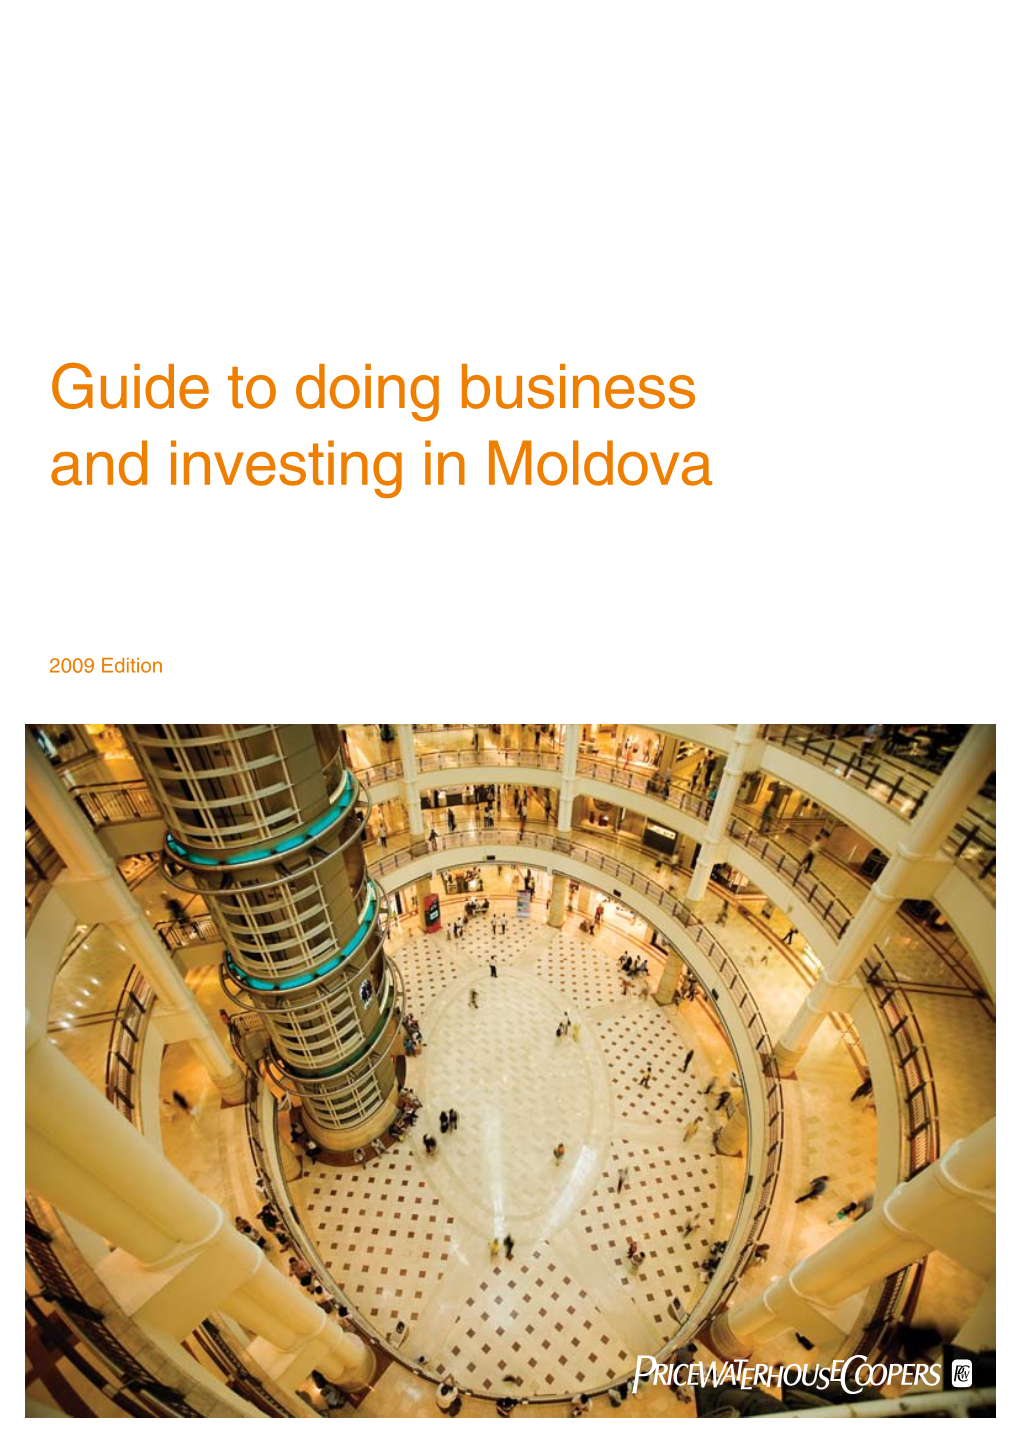 Guide to Doing Business and Investing in Moldova